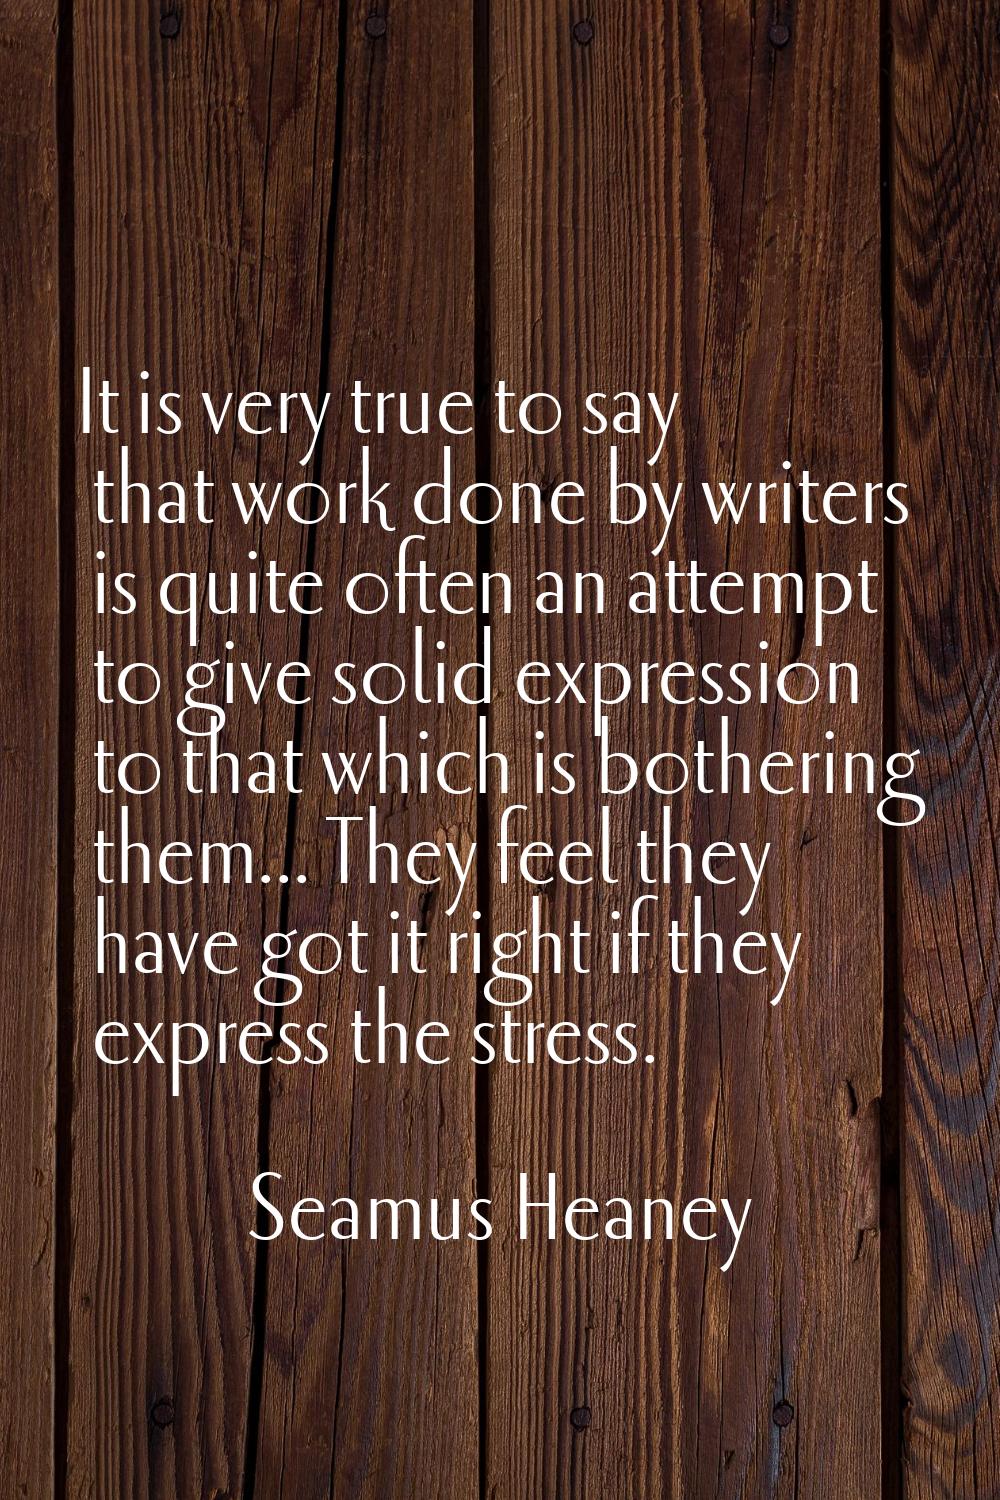 It is very true to say that work done by writers is quite often an attempt to give solid expression